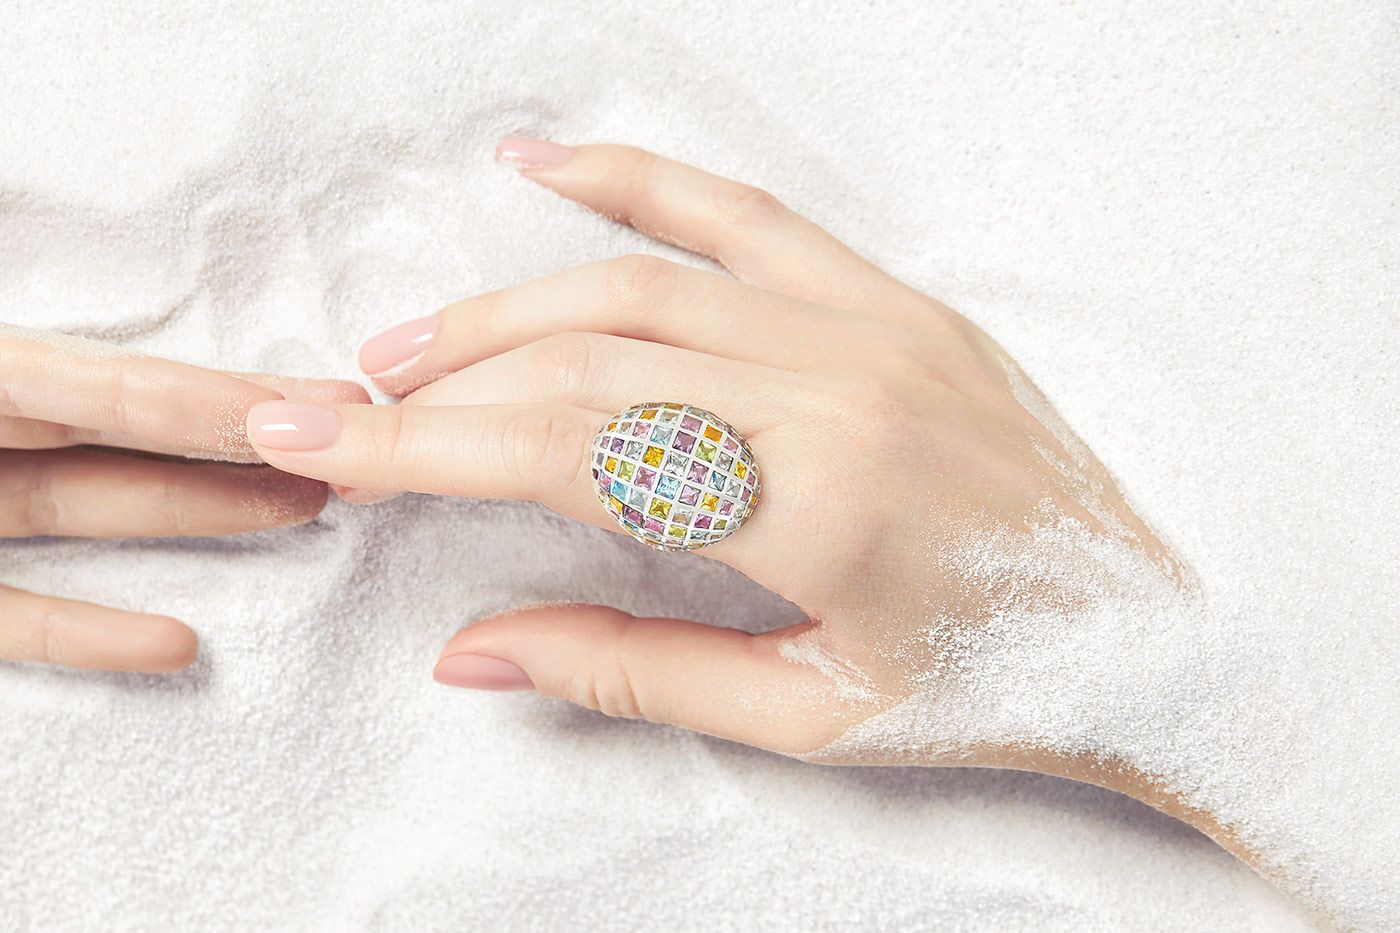 Aisha Baker Lip Gloss ring created from a series of princess-cut gemstones in a unicorn colour palette